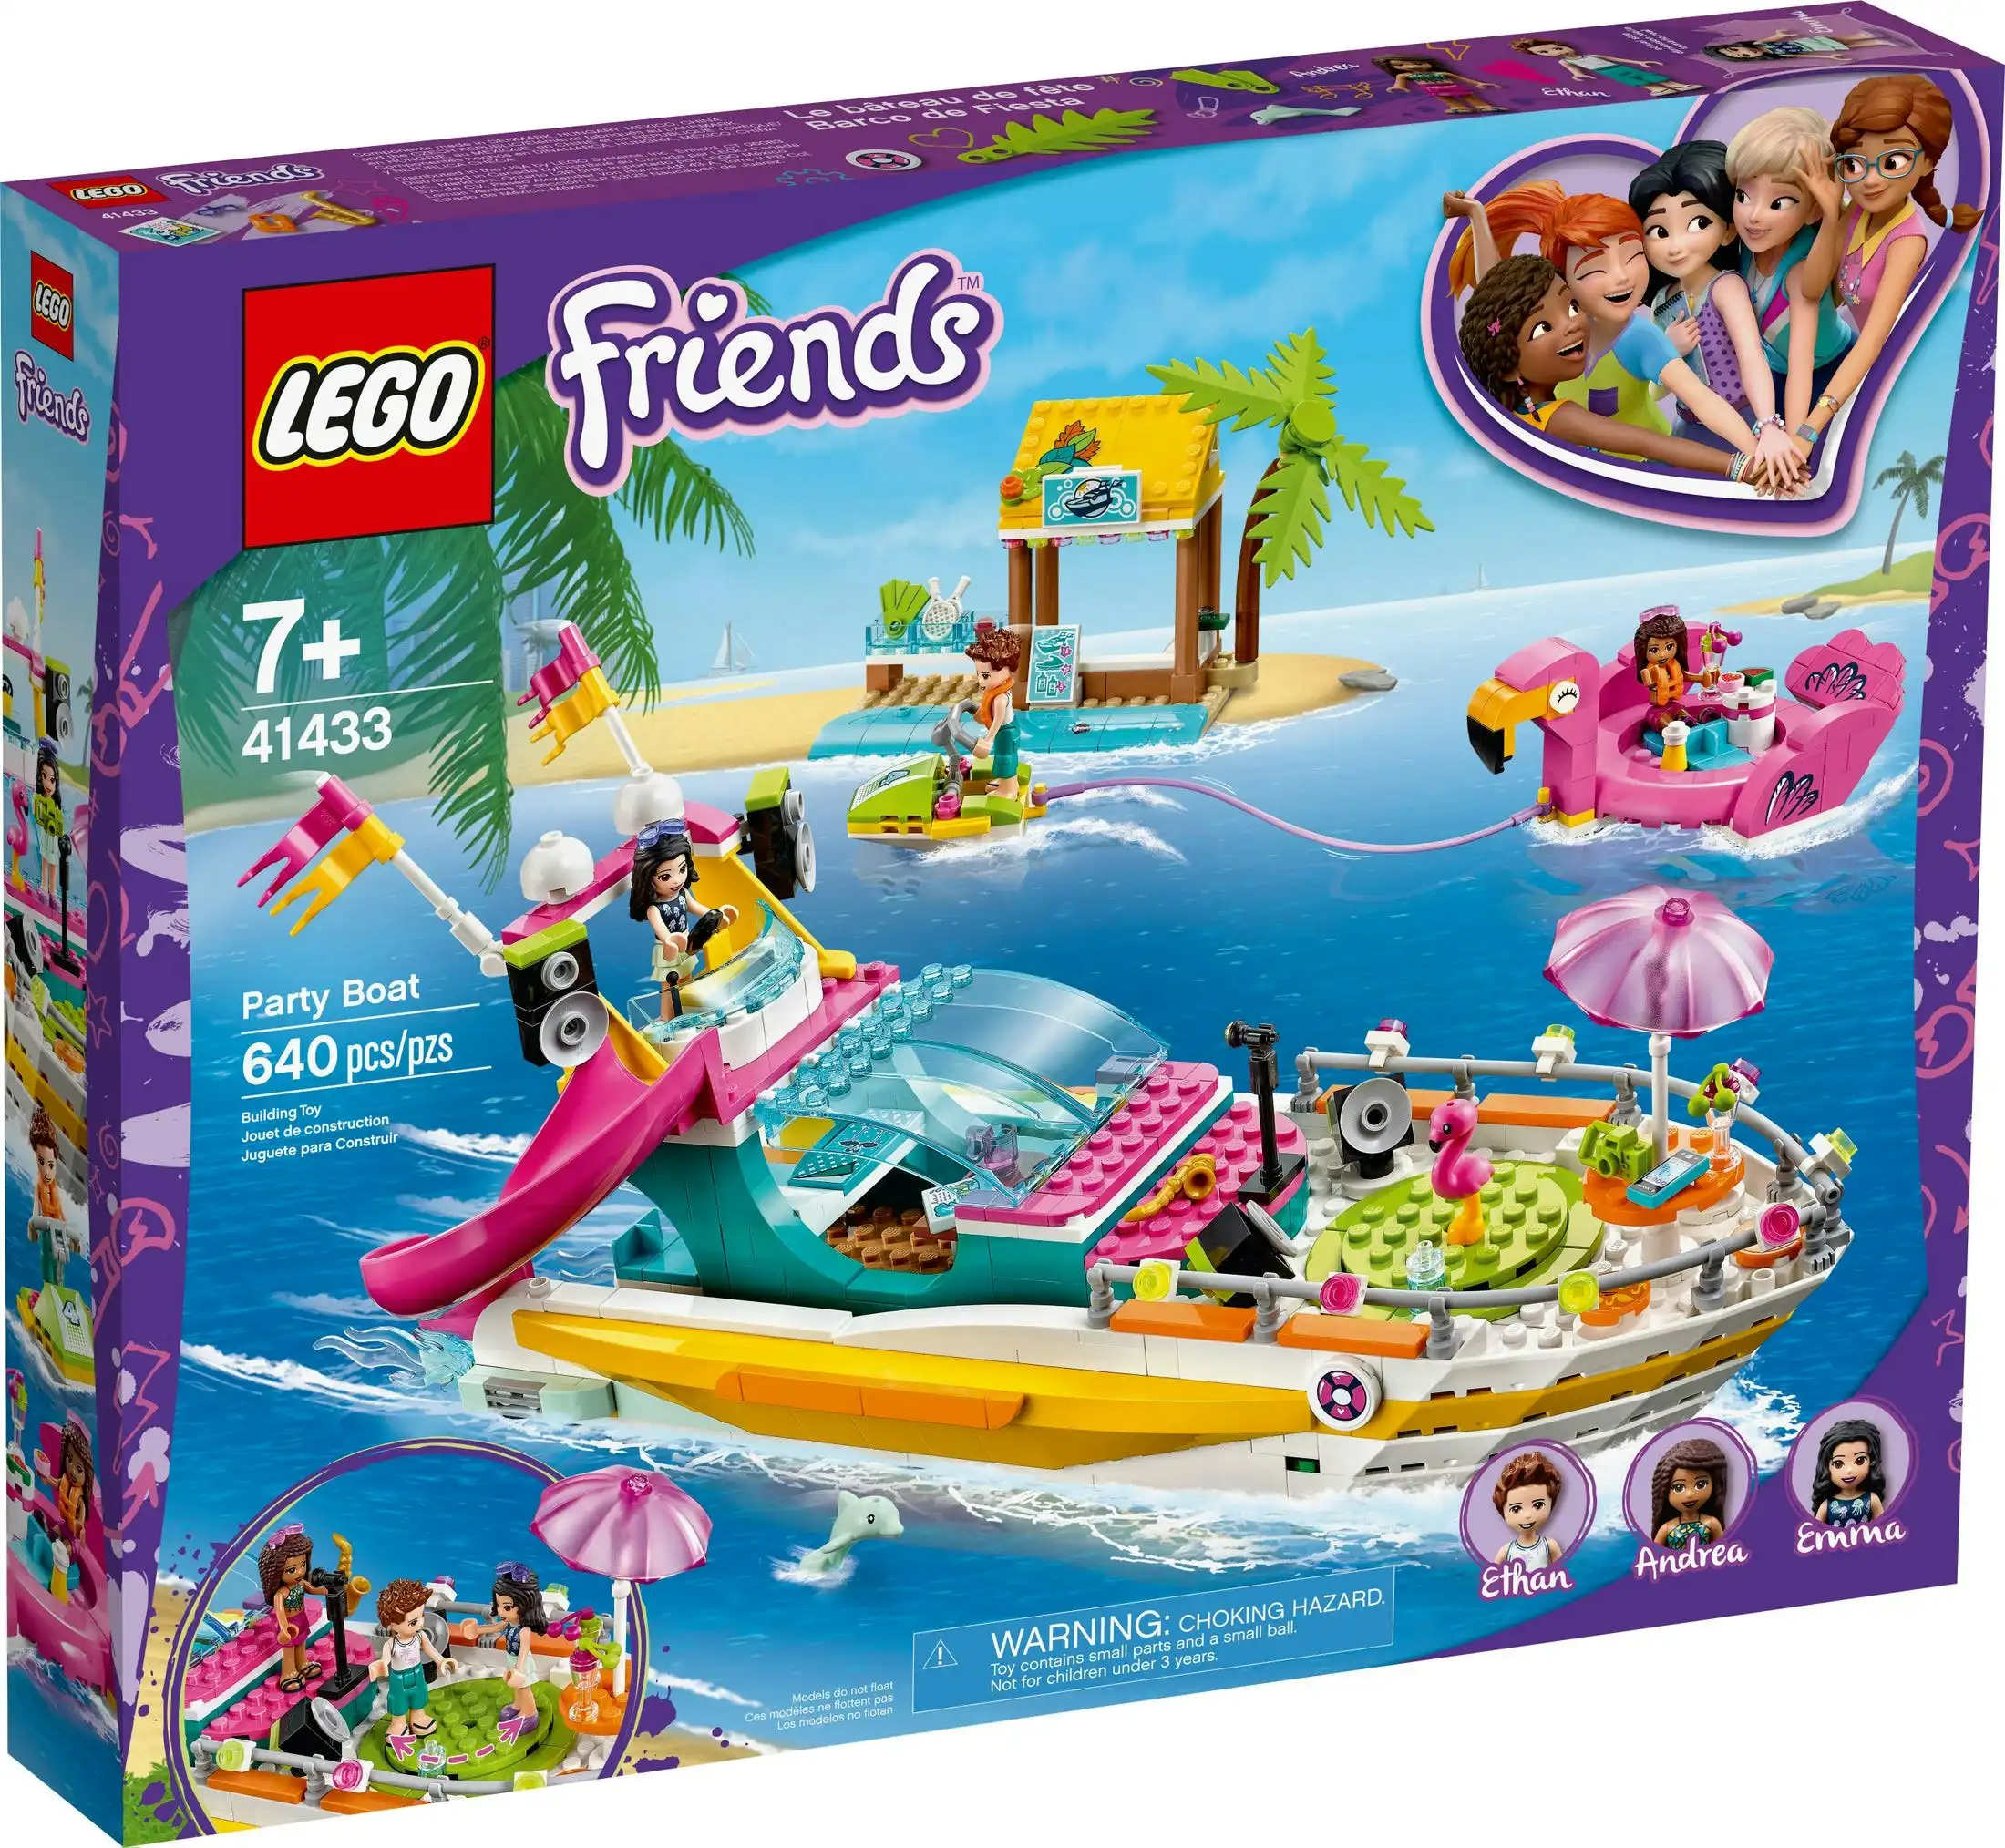 LEGO 41433 Party Boat - Friends